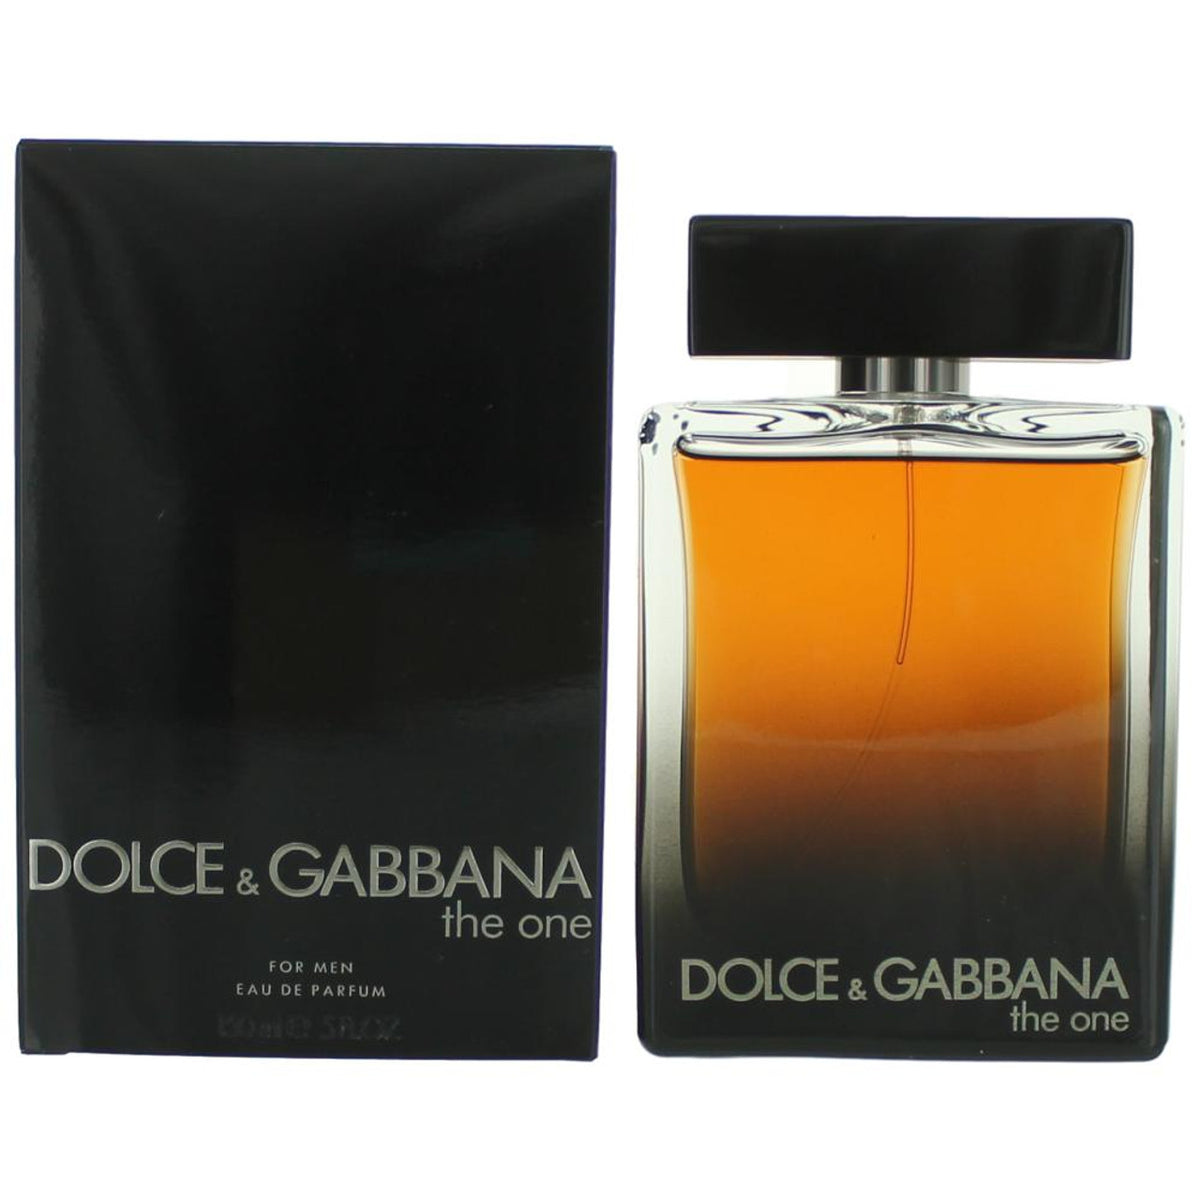 The One by Dolce & Gabbana, 5 oz EDP Spray for Men